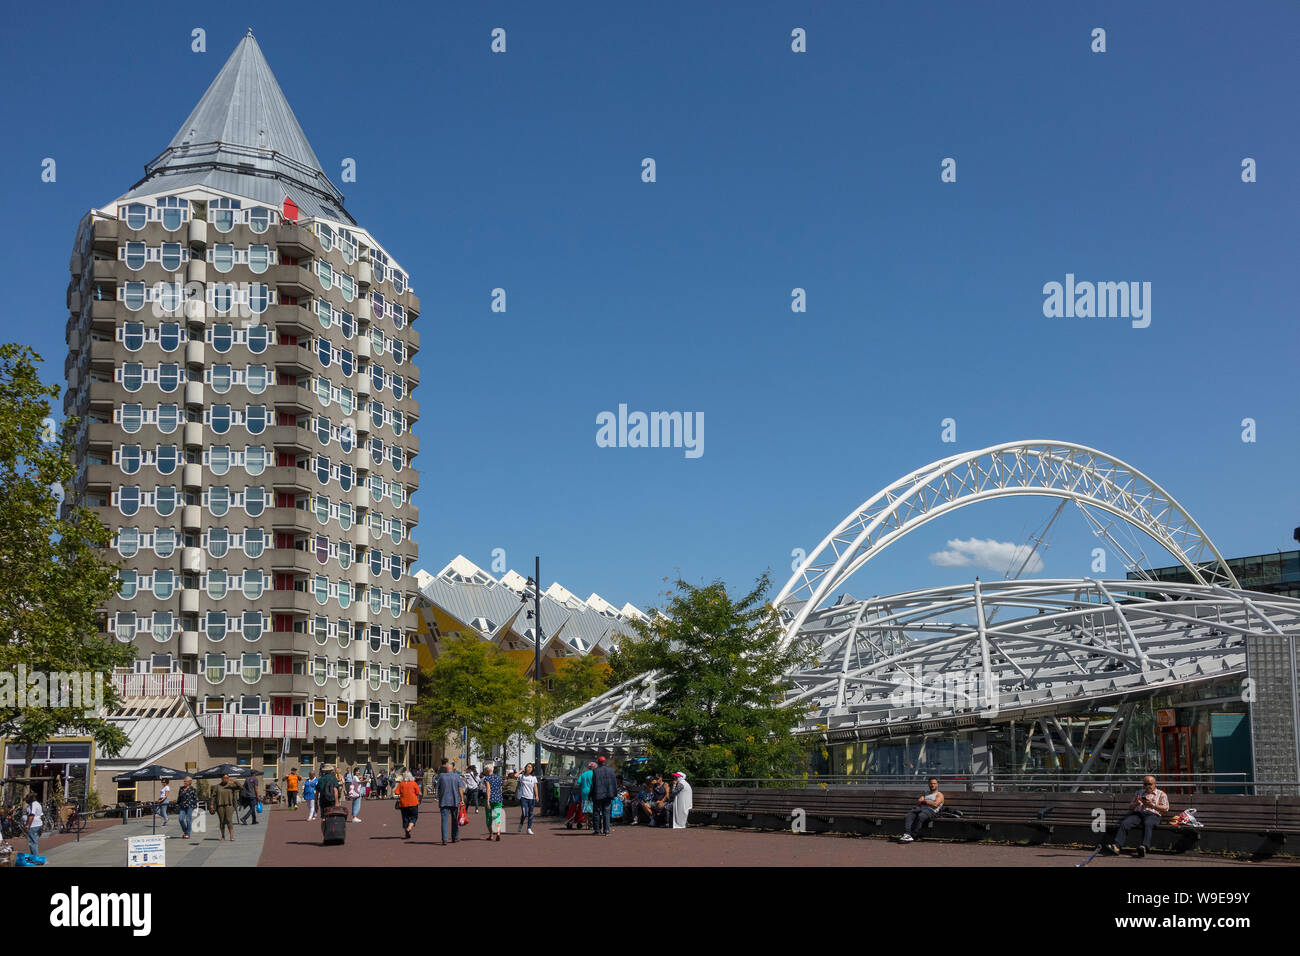 Rotterdam, Holland - July 30, 2019: Blaaktower, called the pencil, designed by architect Piet Blom and the Blaak train station Stock Photo